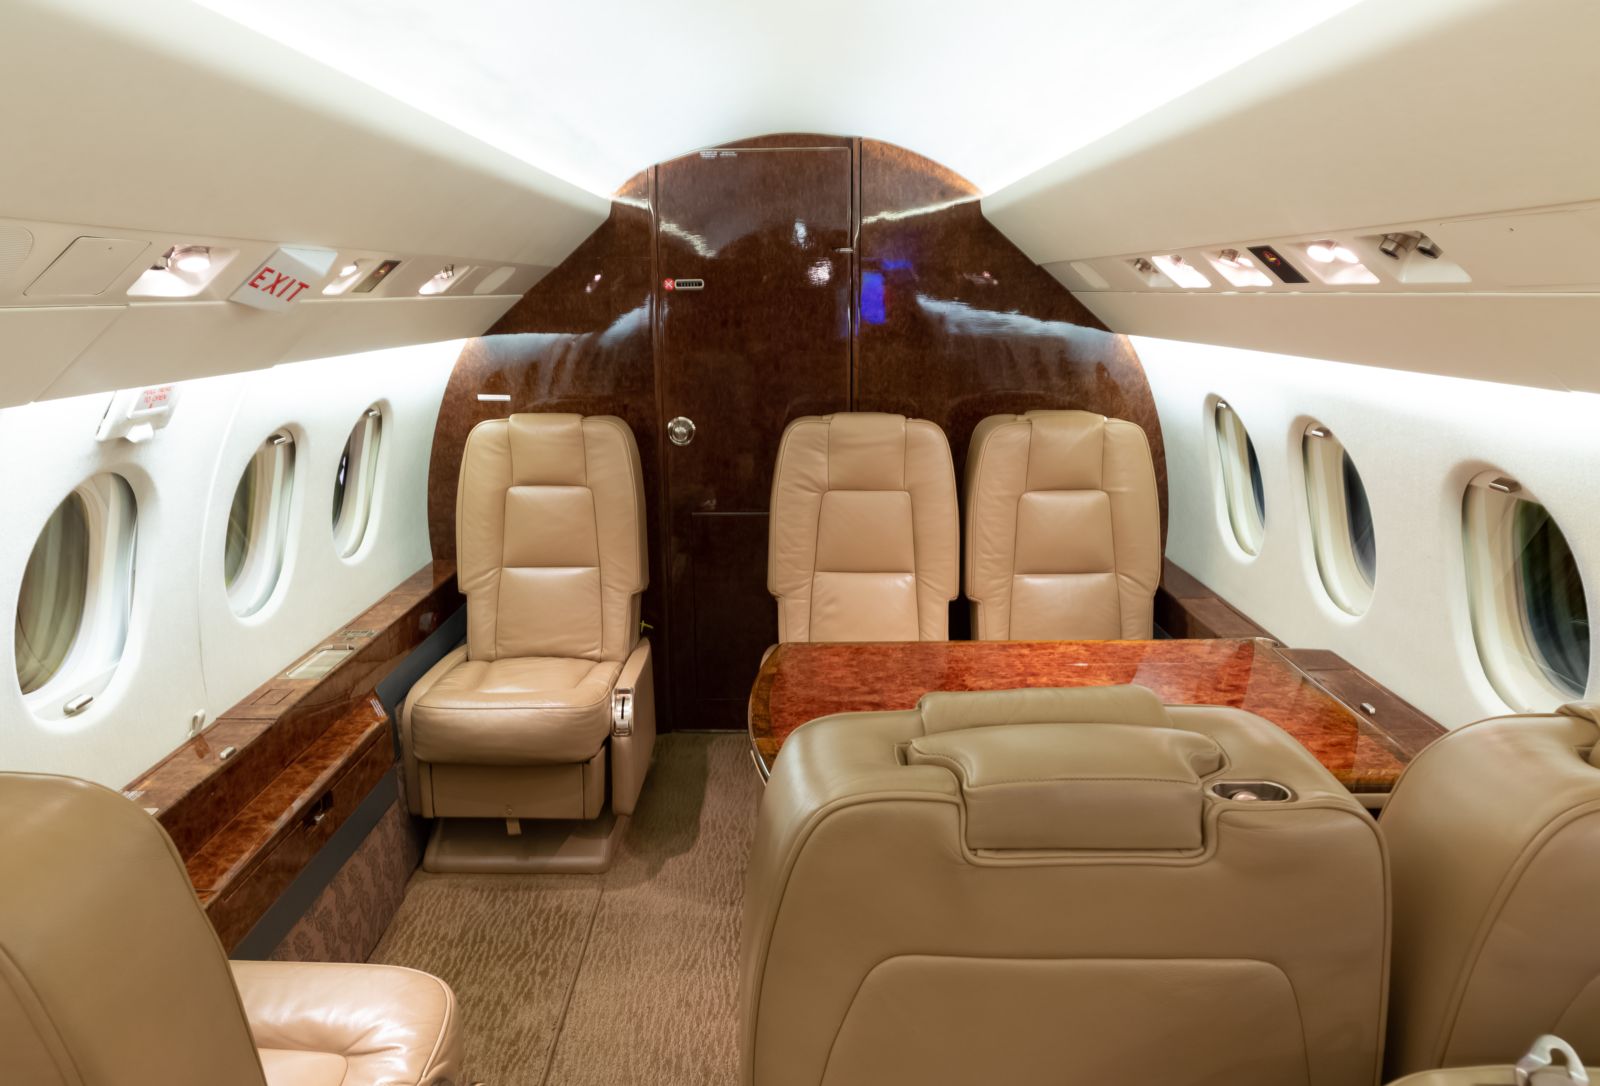 Dassault Falcon 2000  S/N 60 for sale | gallery image: /userfiles/images/F2000_sn60/aft%20aft.jpg